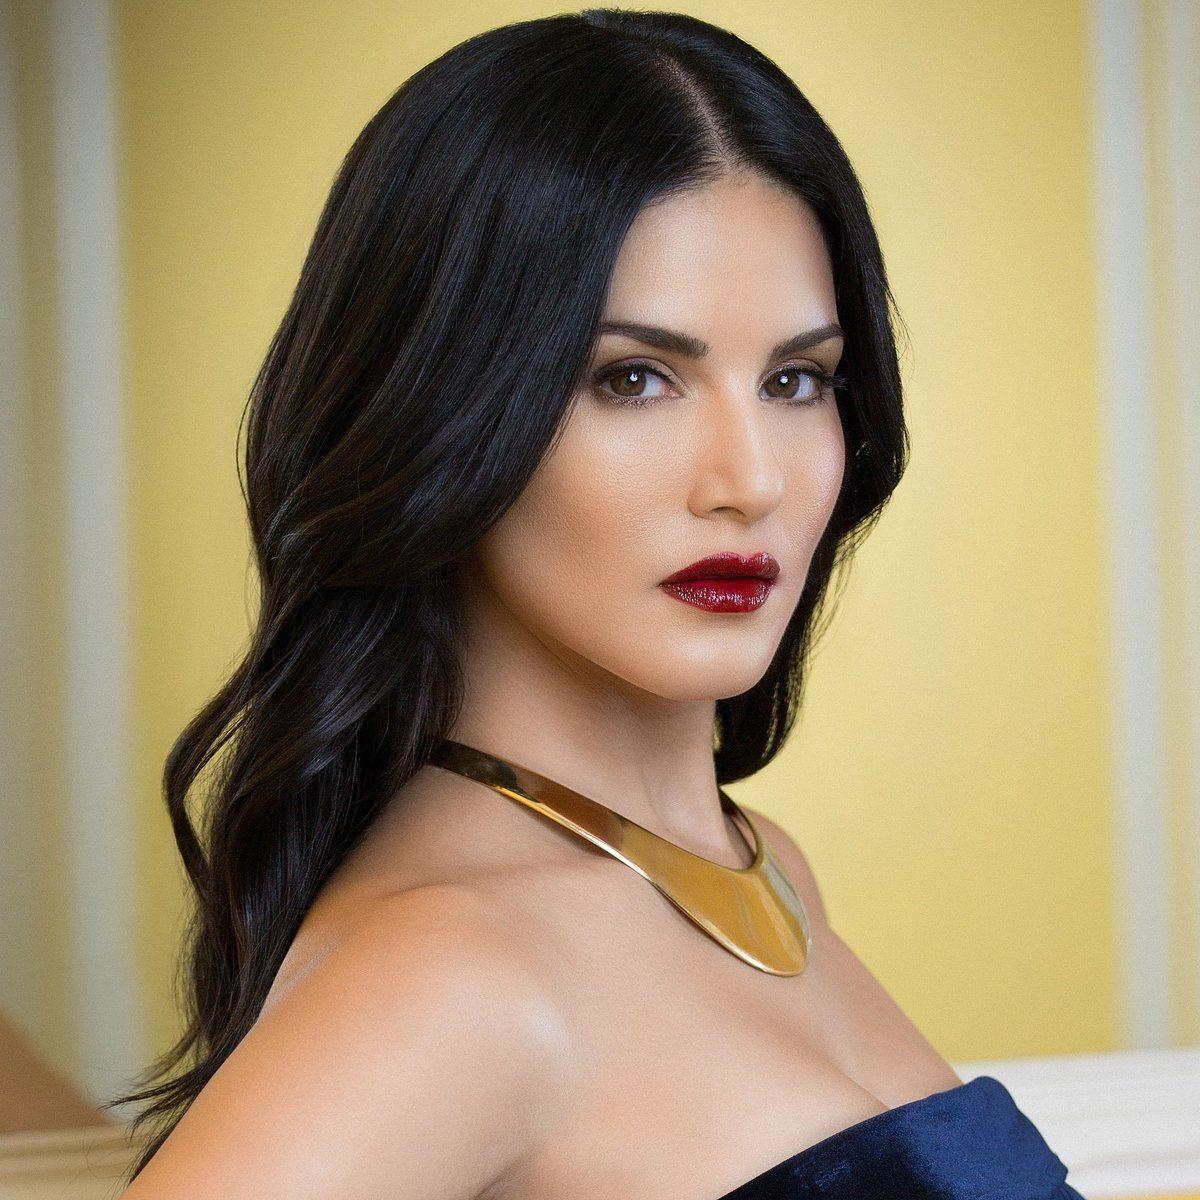 See The Sizzling Instagram Pictures Of Sunny Leone